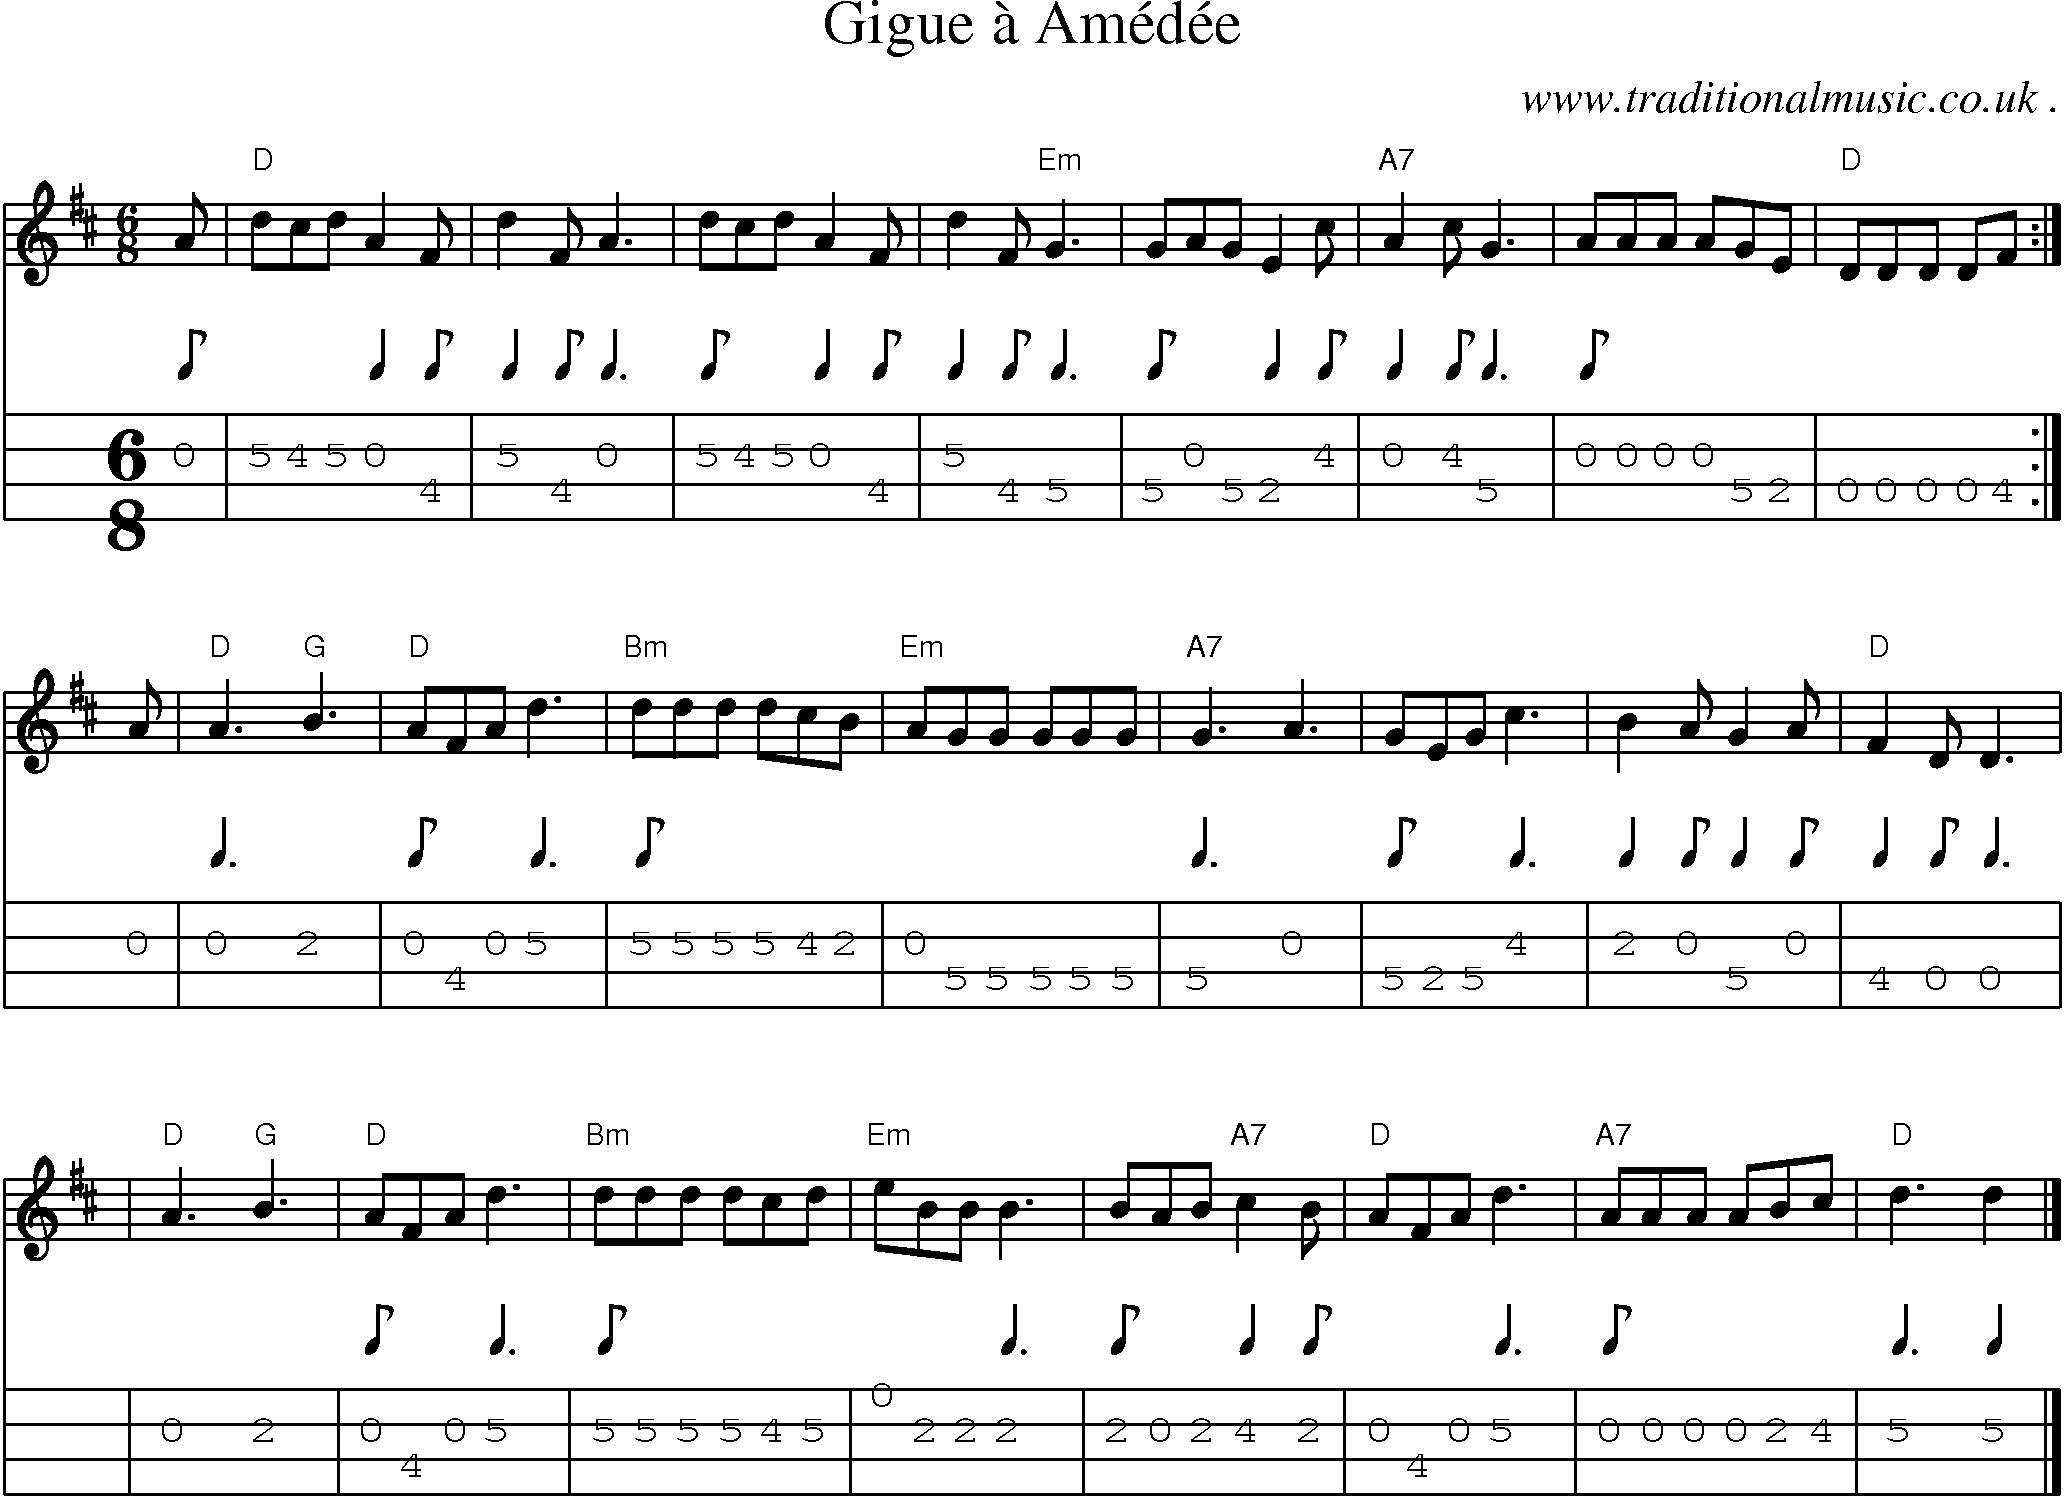 Sheet-music  score, Chords and Mandolin Tabs for Gigue A Amedee